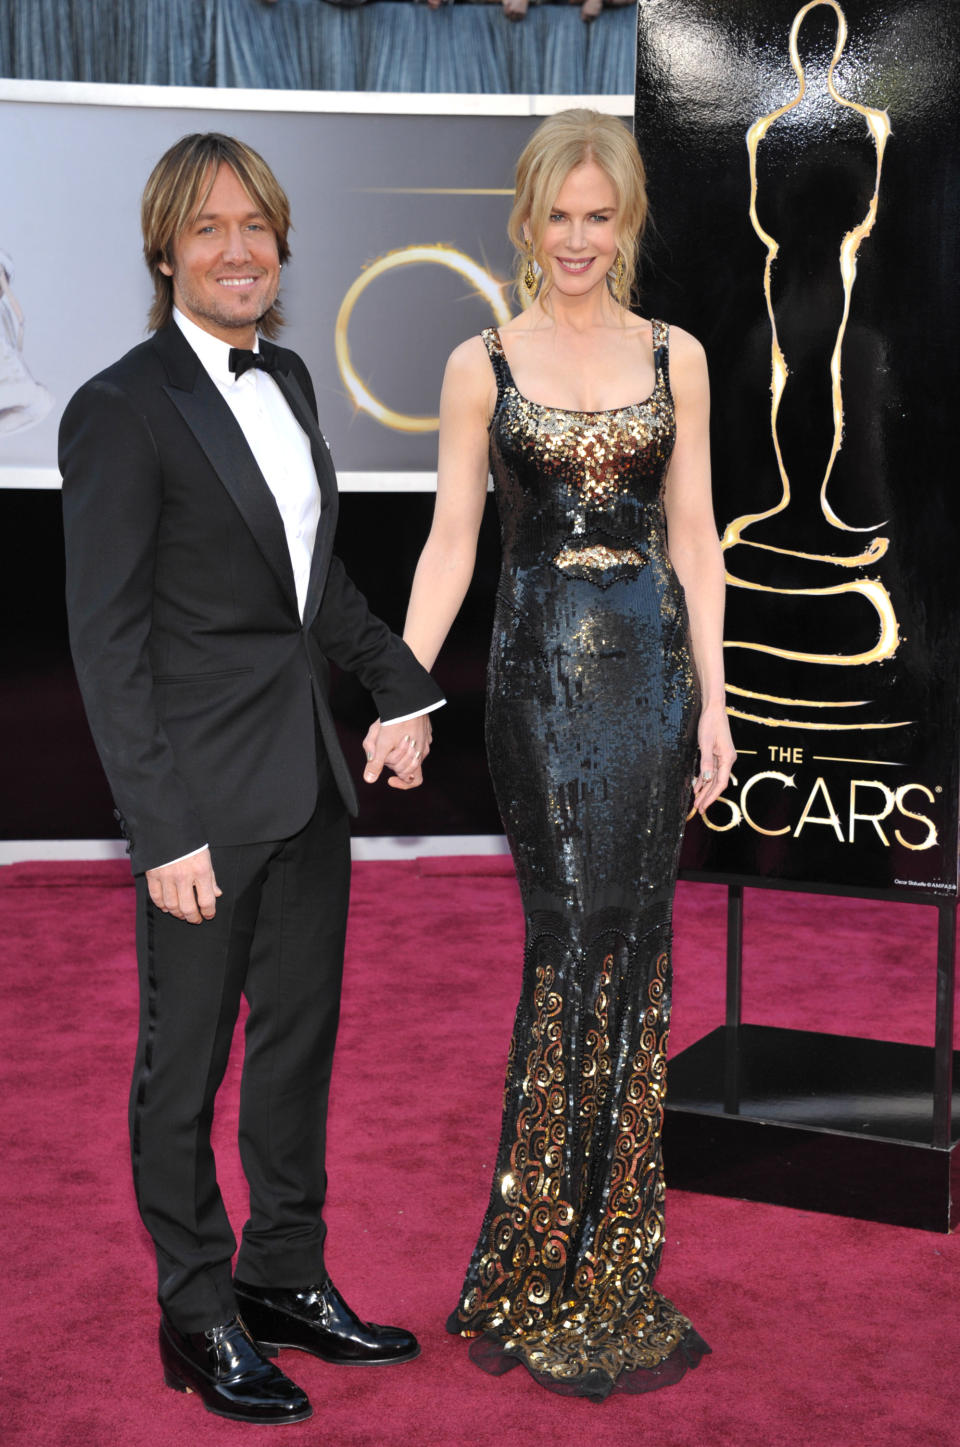 FILE - This Feb. 24, 2013 file photo shows musician Keith Urban, left, and his wife actress Nicole Kidman wearing a L'Wren Scott gown at the Oscars at the Dolby Theatre in Los Angeles. Scott was found dead Monday, March 17, 2014, in Manhattan of a possible suicide. (Photo by John Shearer/Invision/AP, file)